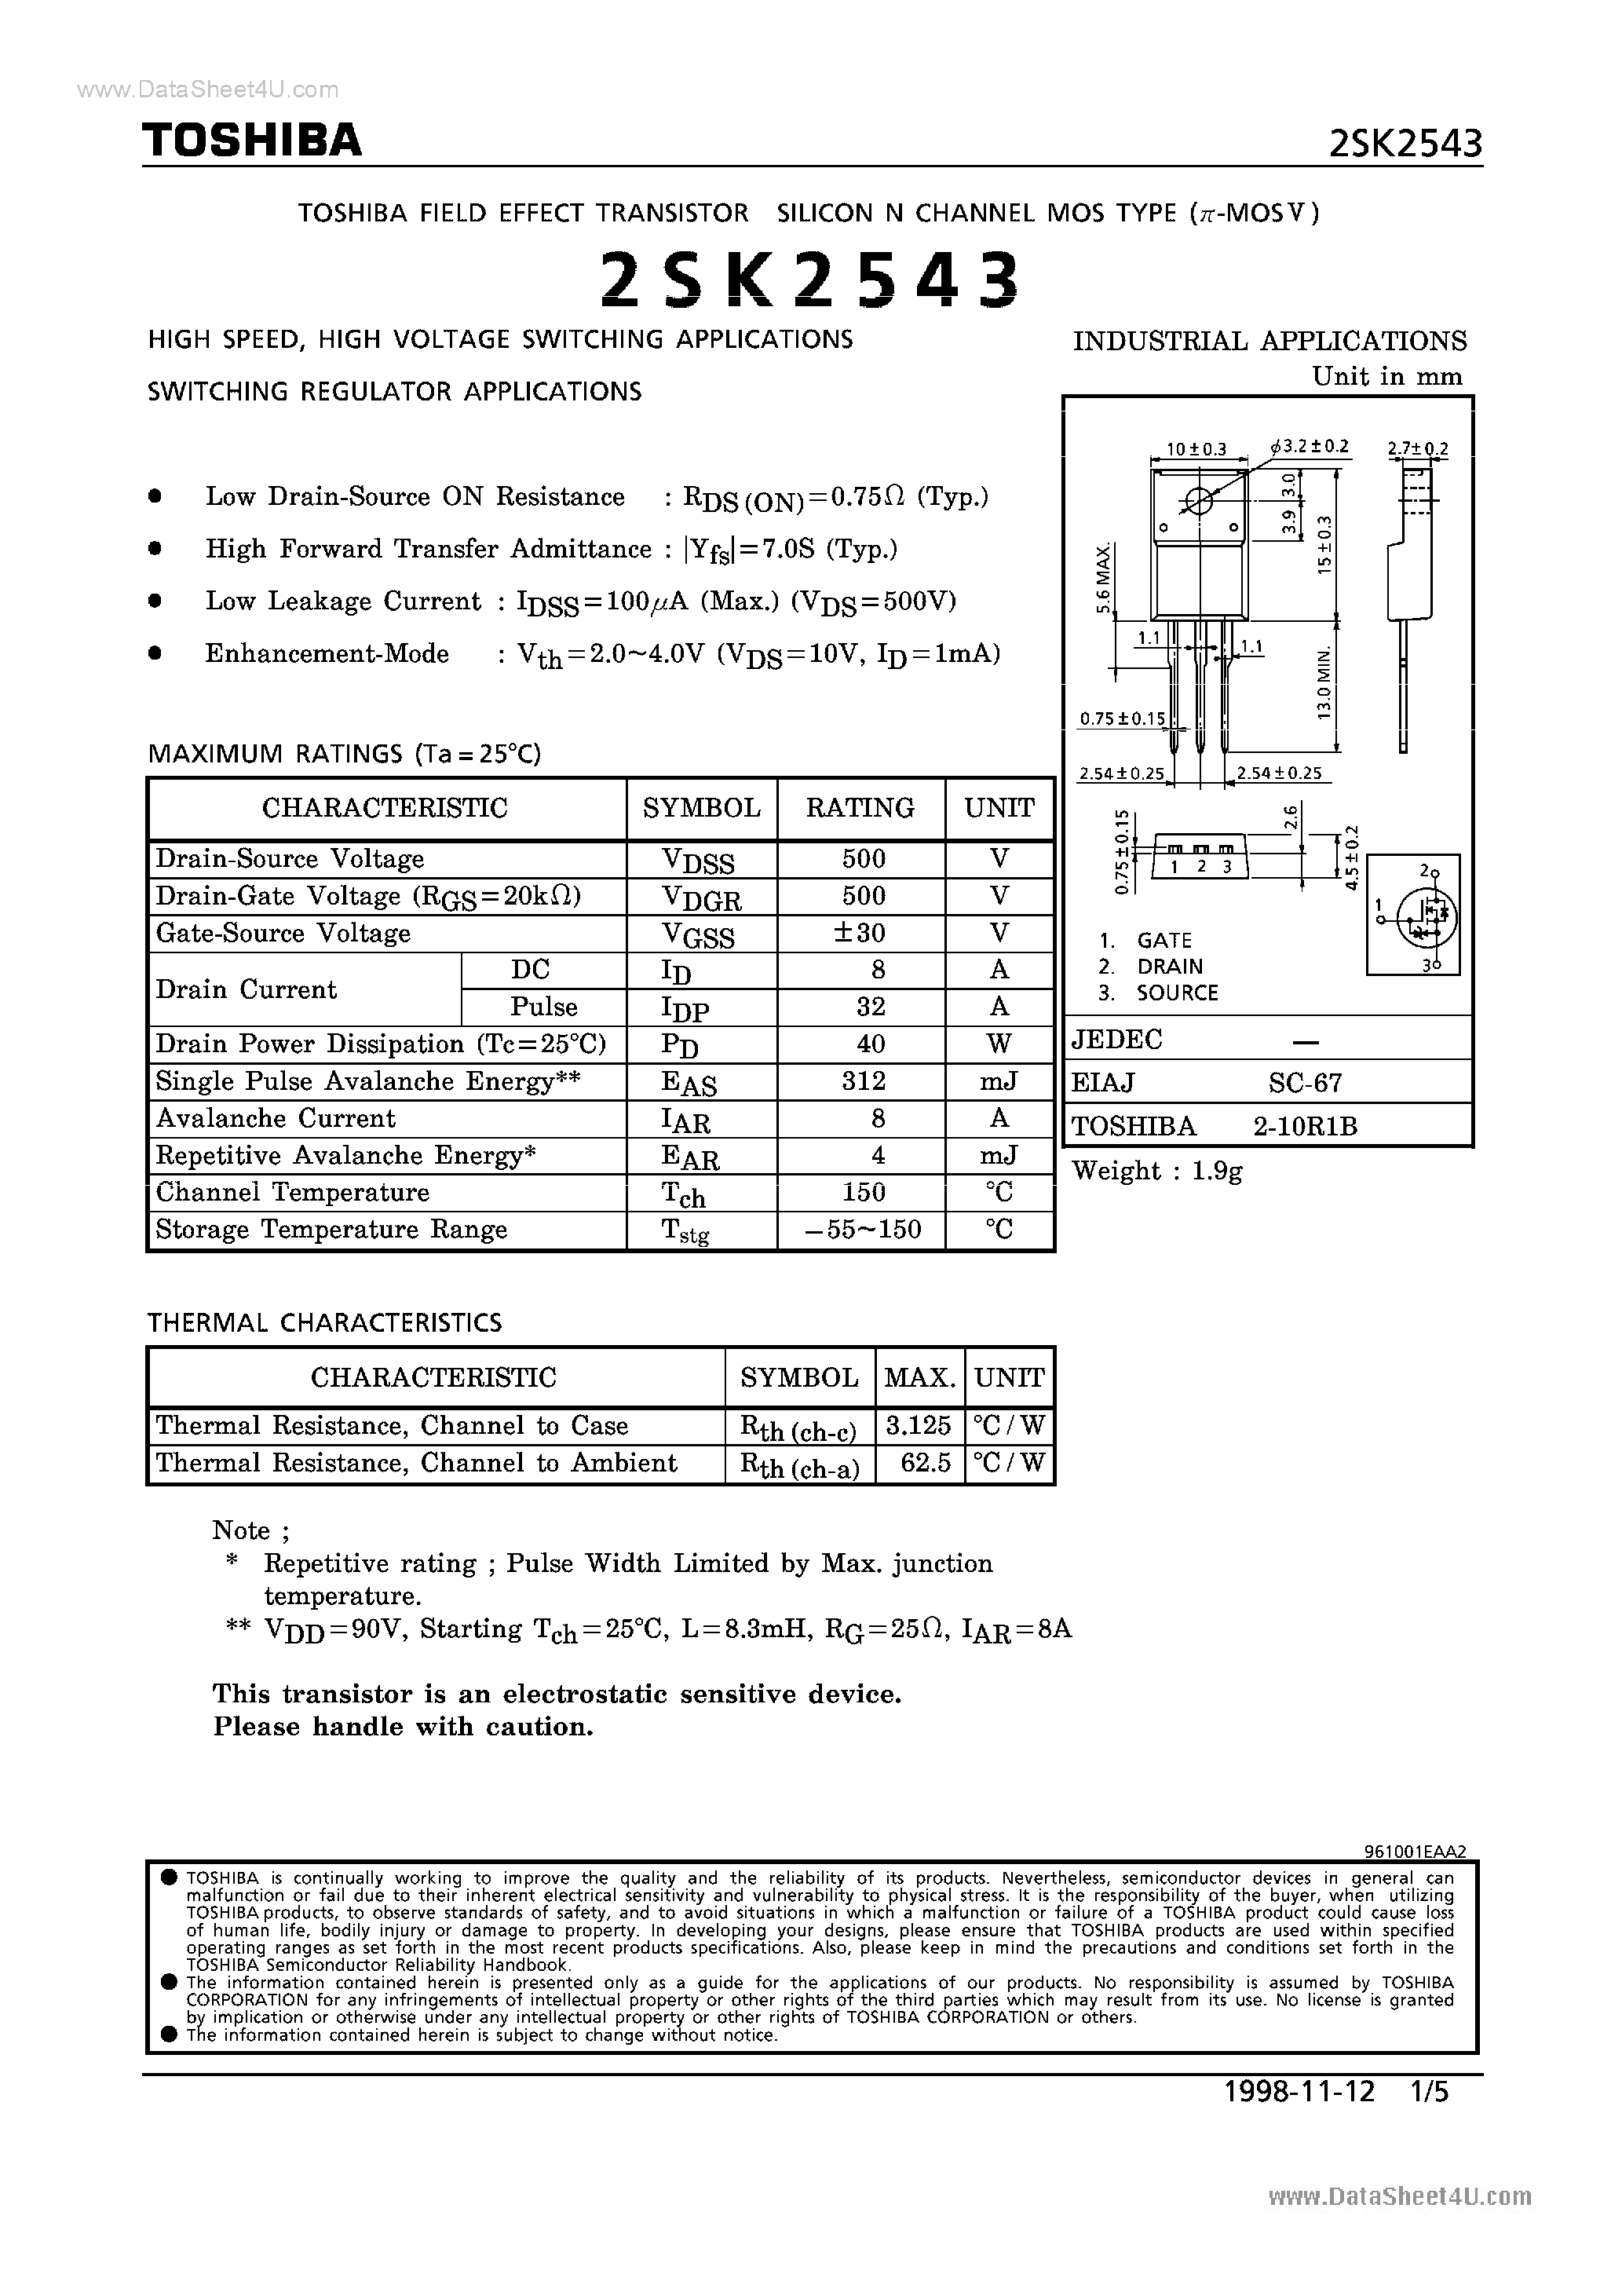 Datasheet K2543 - Search -----> 2SK2543 page 1